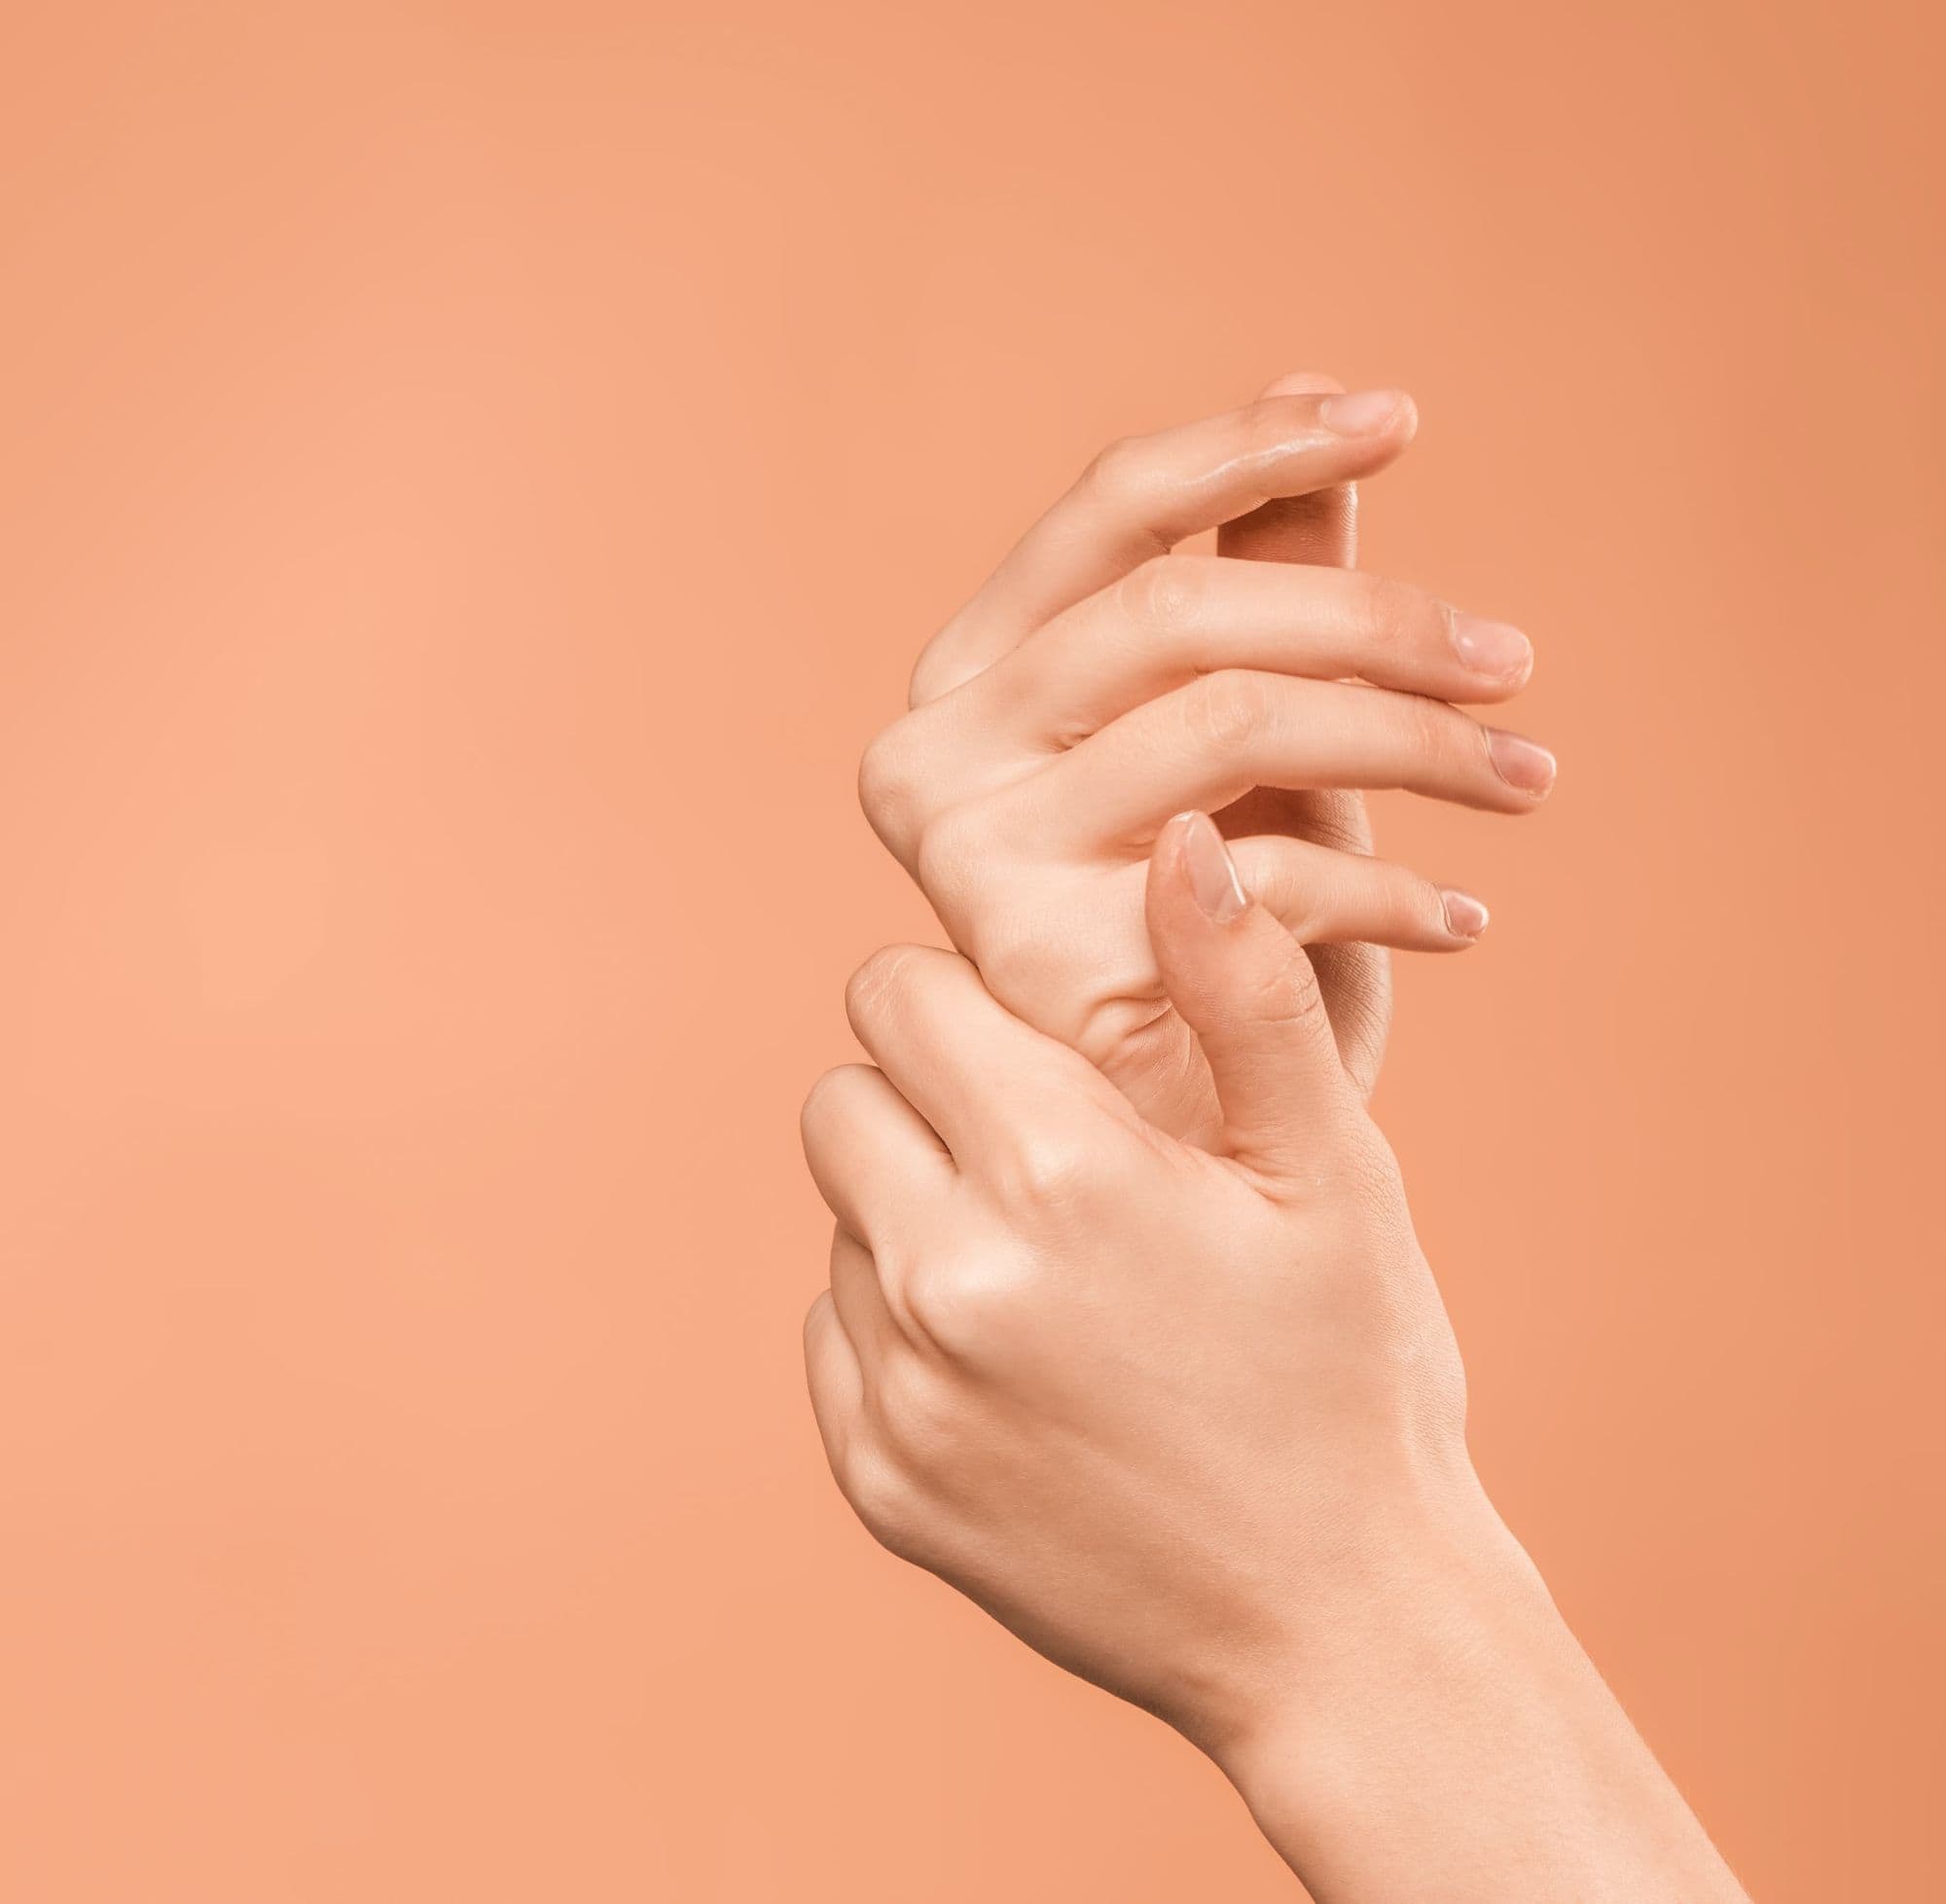 Can dry fasting heal streatch marks and loose skin - hands on the orange background